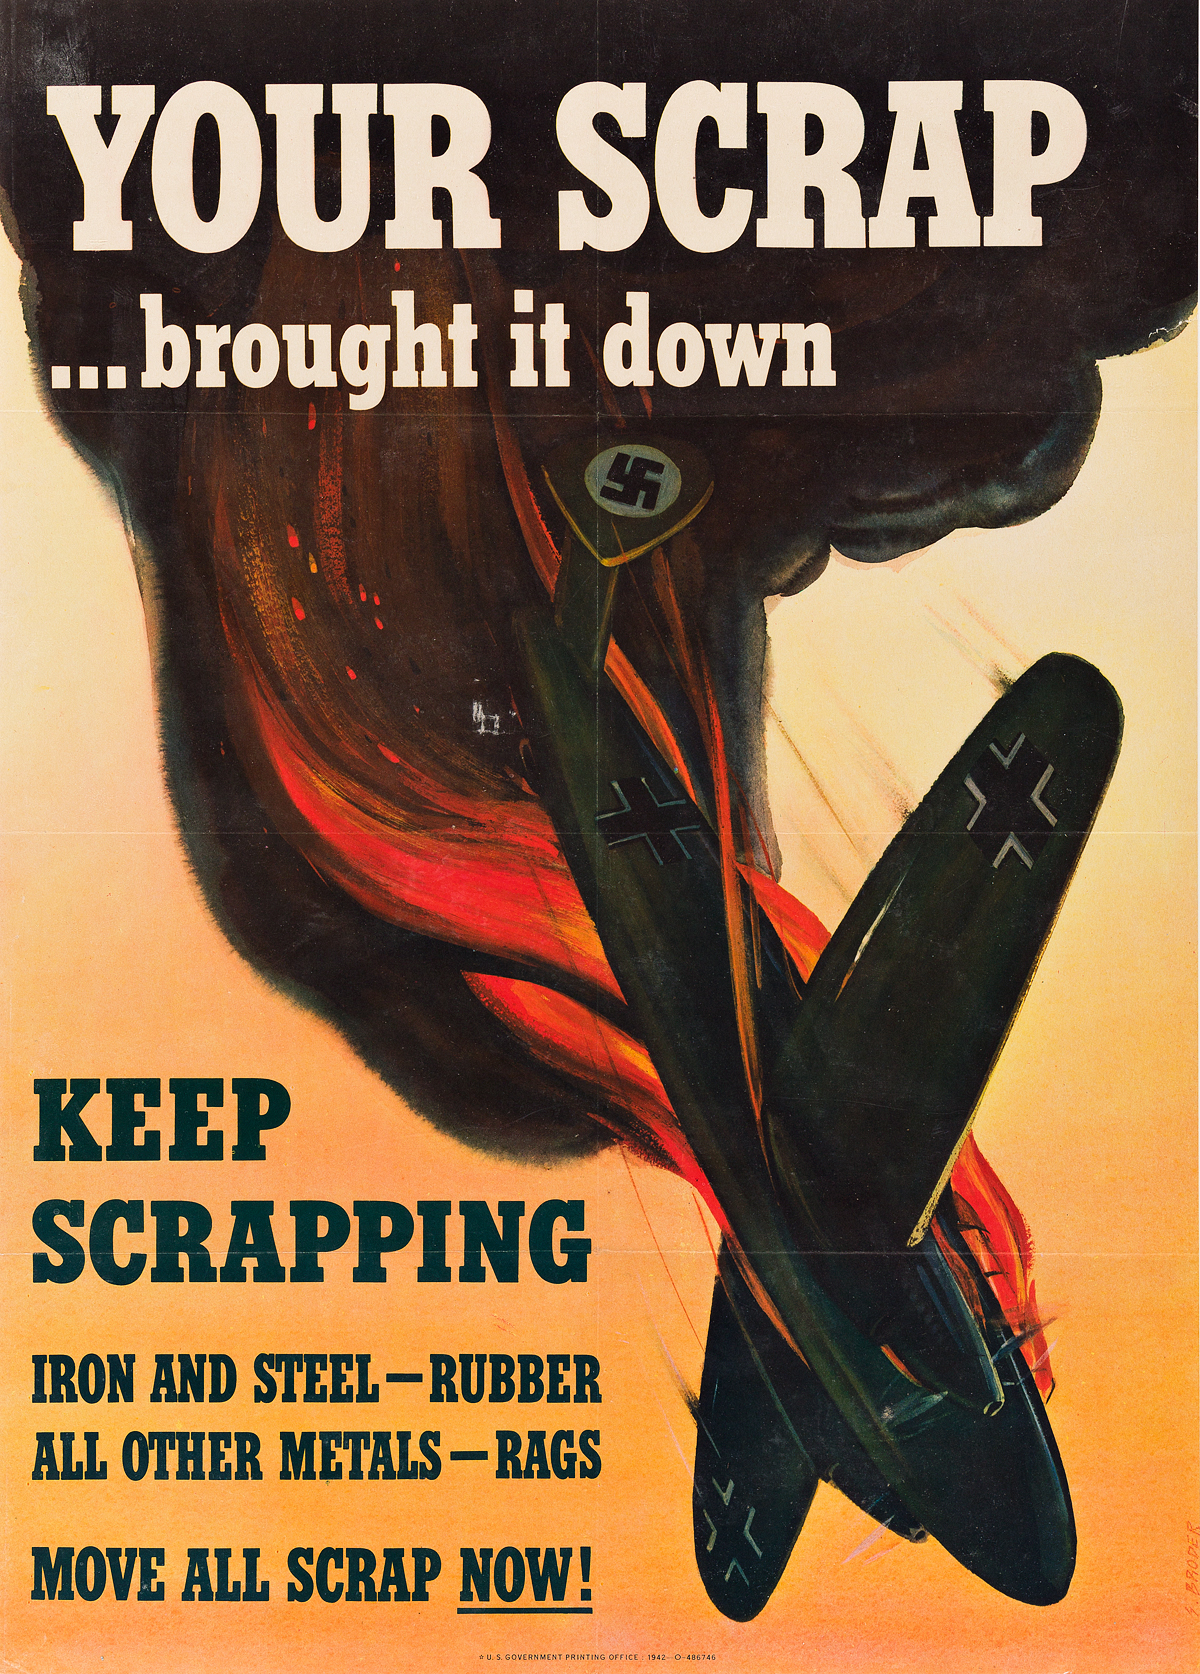 S. BRODER (DATES UNKNOWN). YOUR SCRAP . . . BROUGHT IT DOWN! 1942. 28x20 inches, 71x50 cm. U.S. Government Printing Office, [Washington